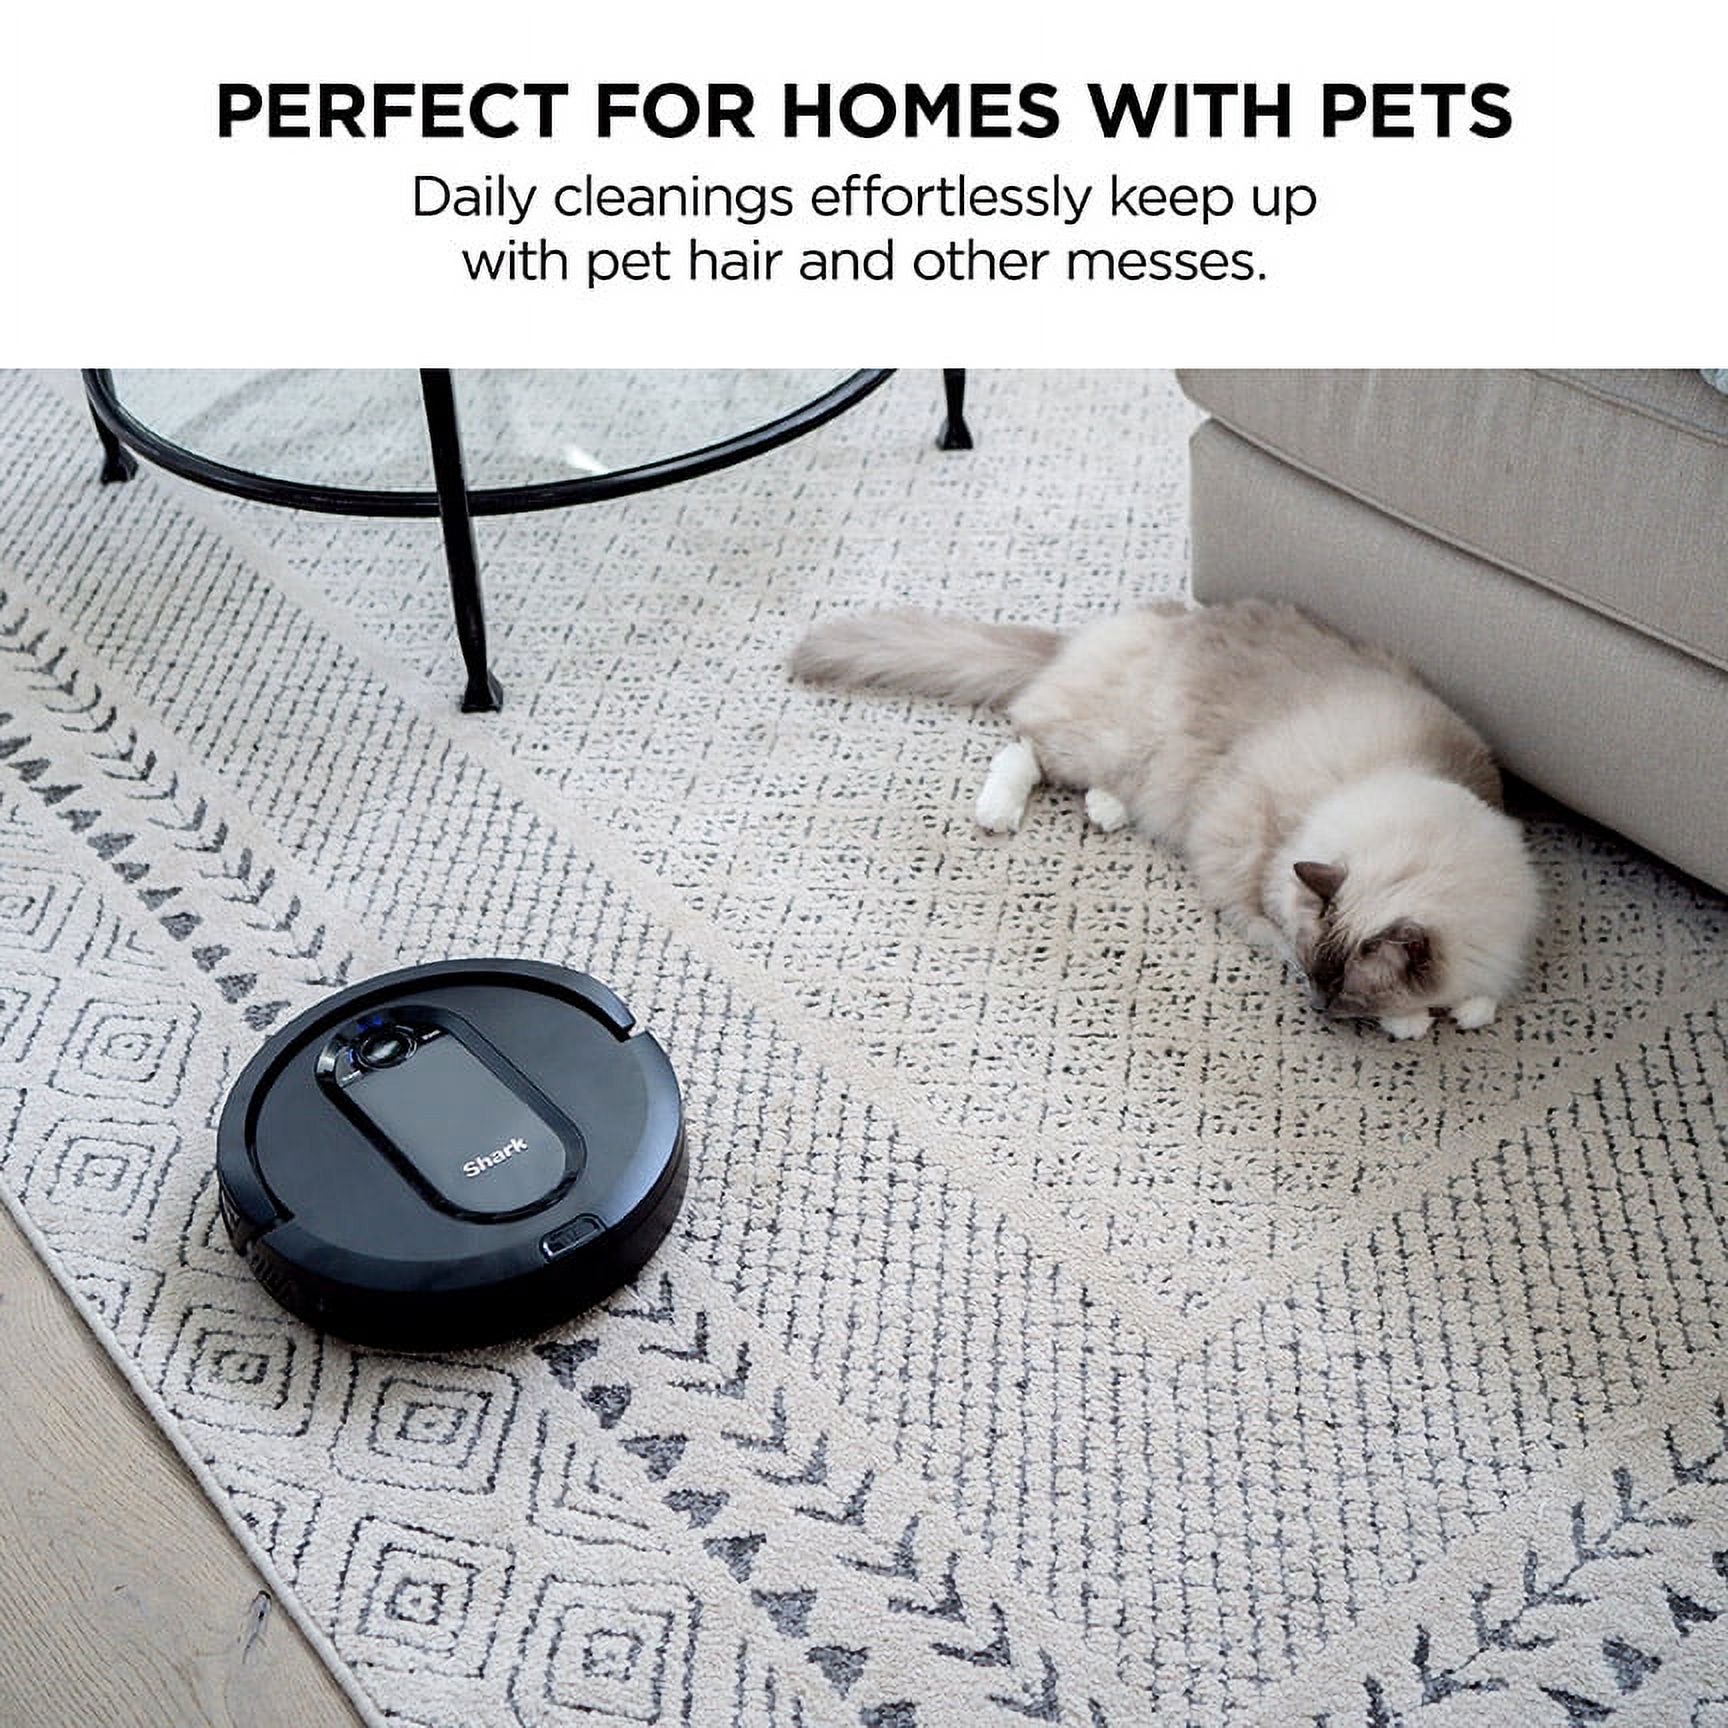 Shark EZ Robot Vacuum with Row-by-Row Cleaning, Powerful Suction, Wi-Fi, Carpets & Hard Floors,RV990 - image 4 of 9